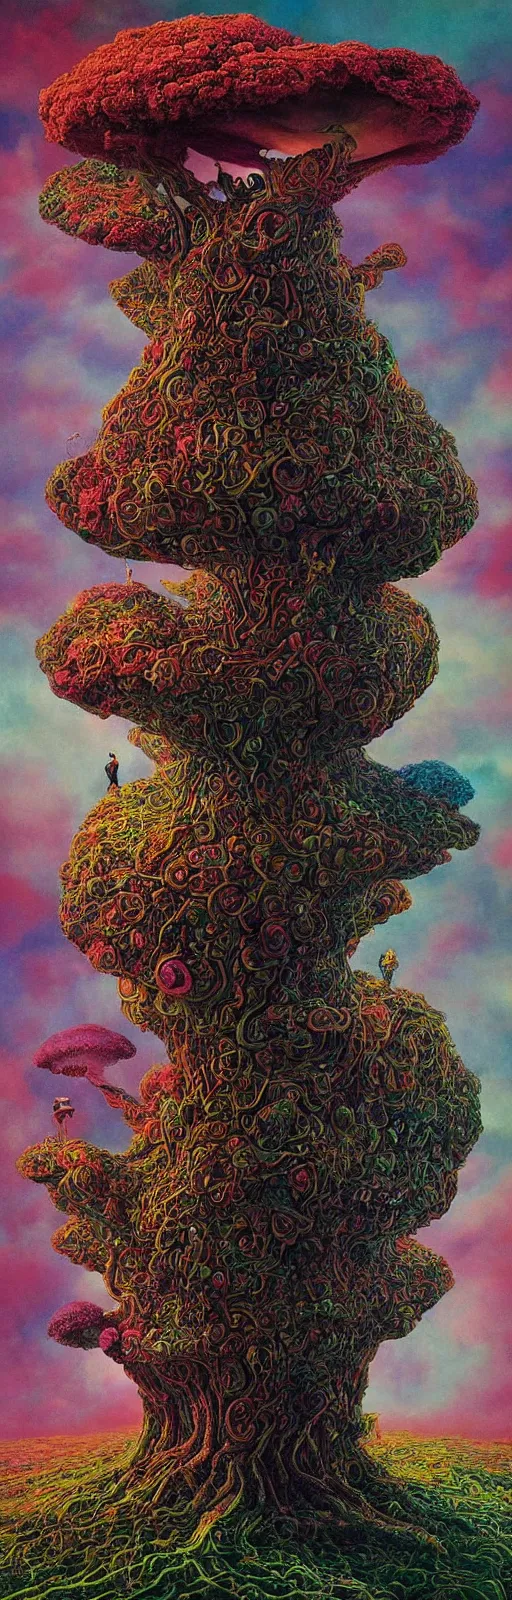 Prompt: ultrawide angle colour masterpiece surreal closeup portrait photography of a tree by annie leibovitz and michael cheval, weird surreal epic psychedelic complex biomorphic shroom 3 d fractal landscape in background by kilian eng and roger dean and salvador dali and beksinski, 8 k